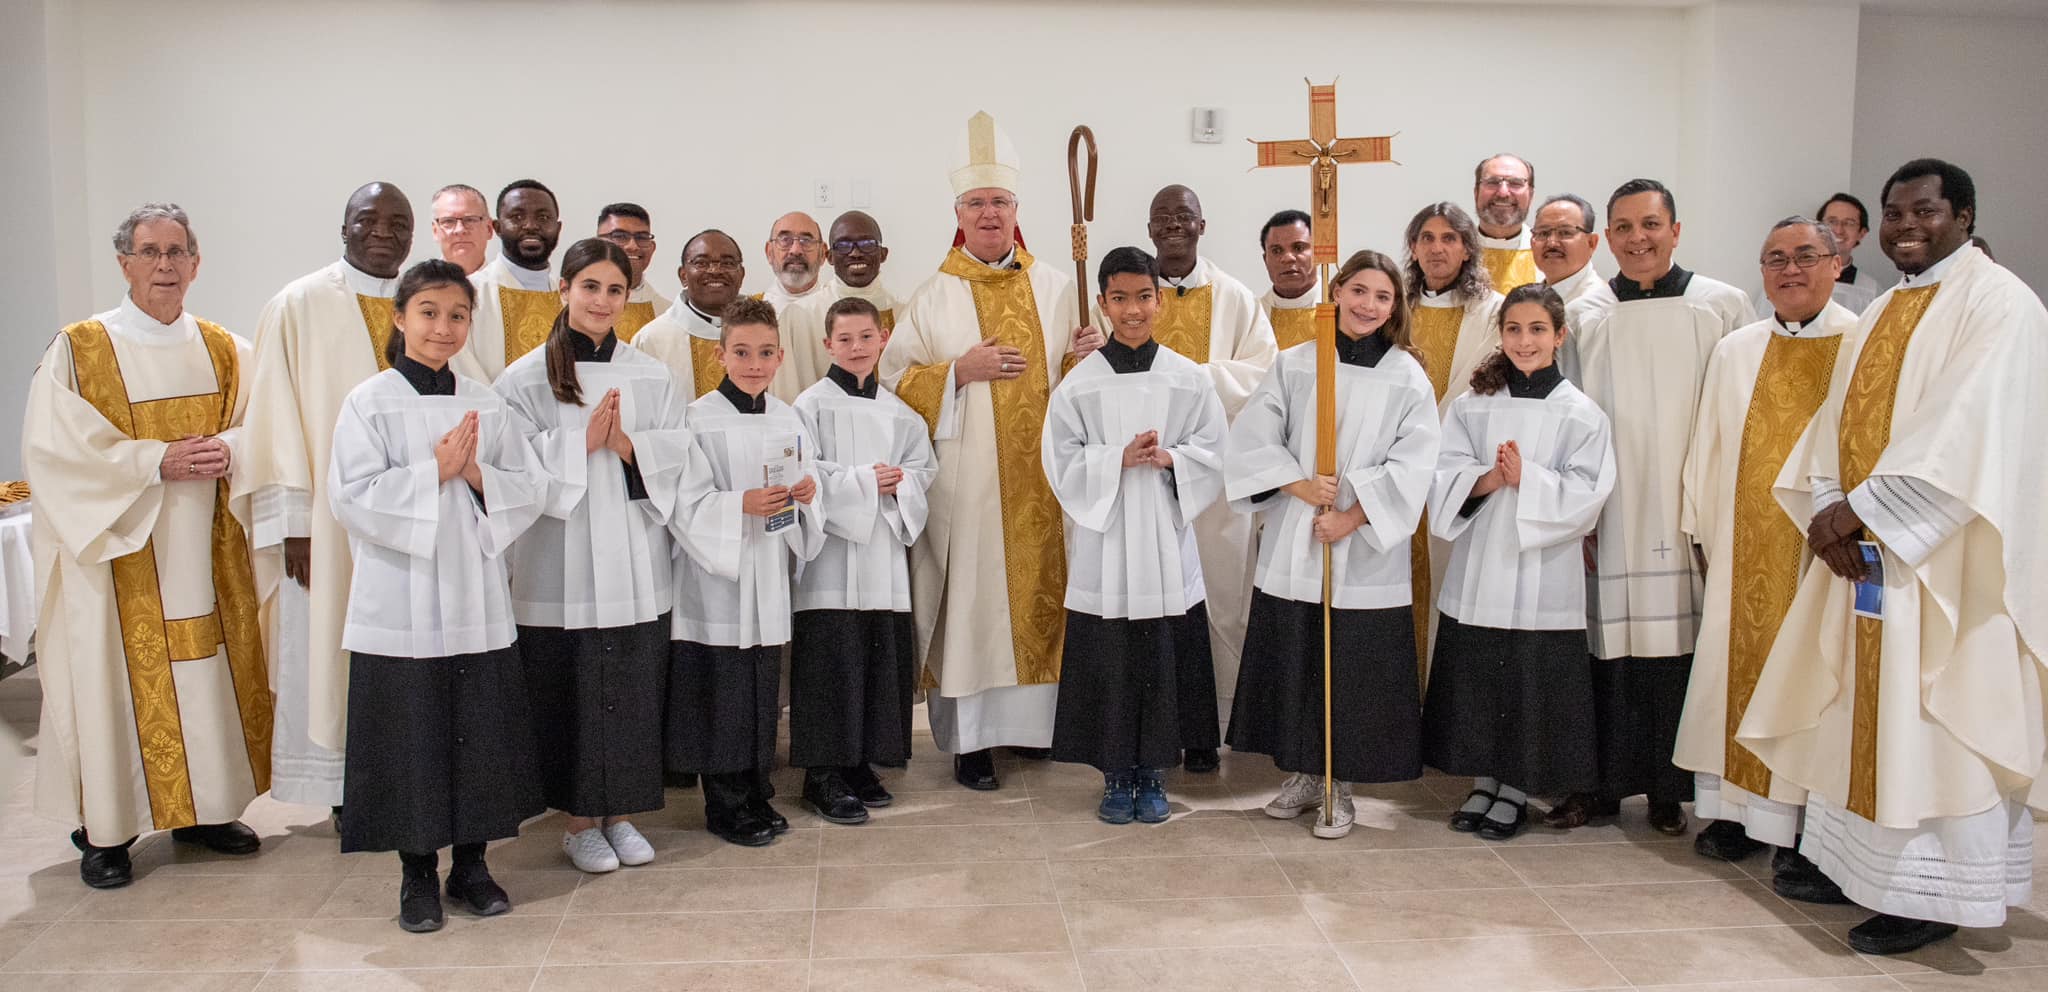 40-year journey ends with opening of a new church for St. Benedict